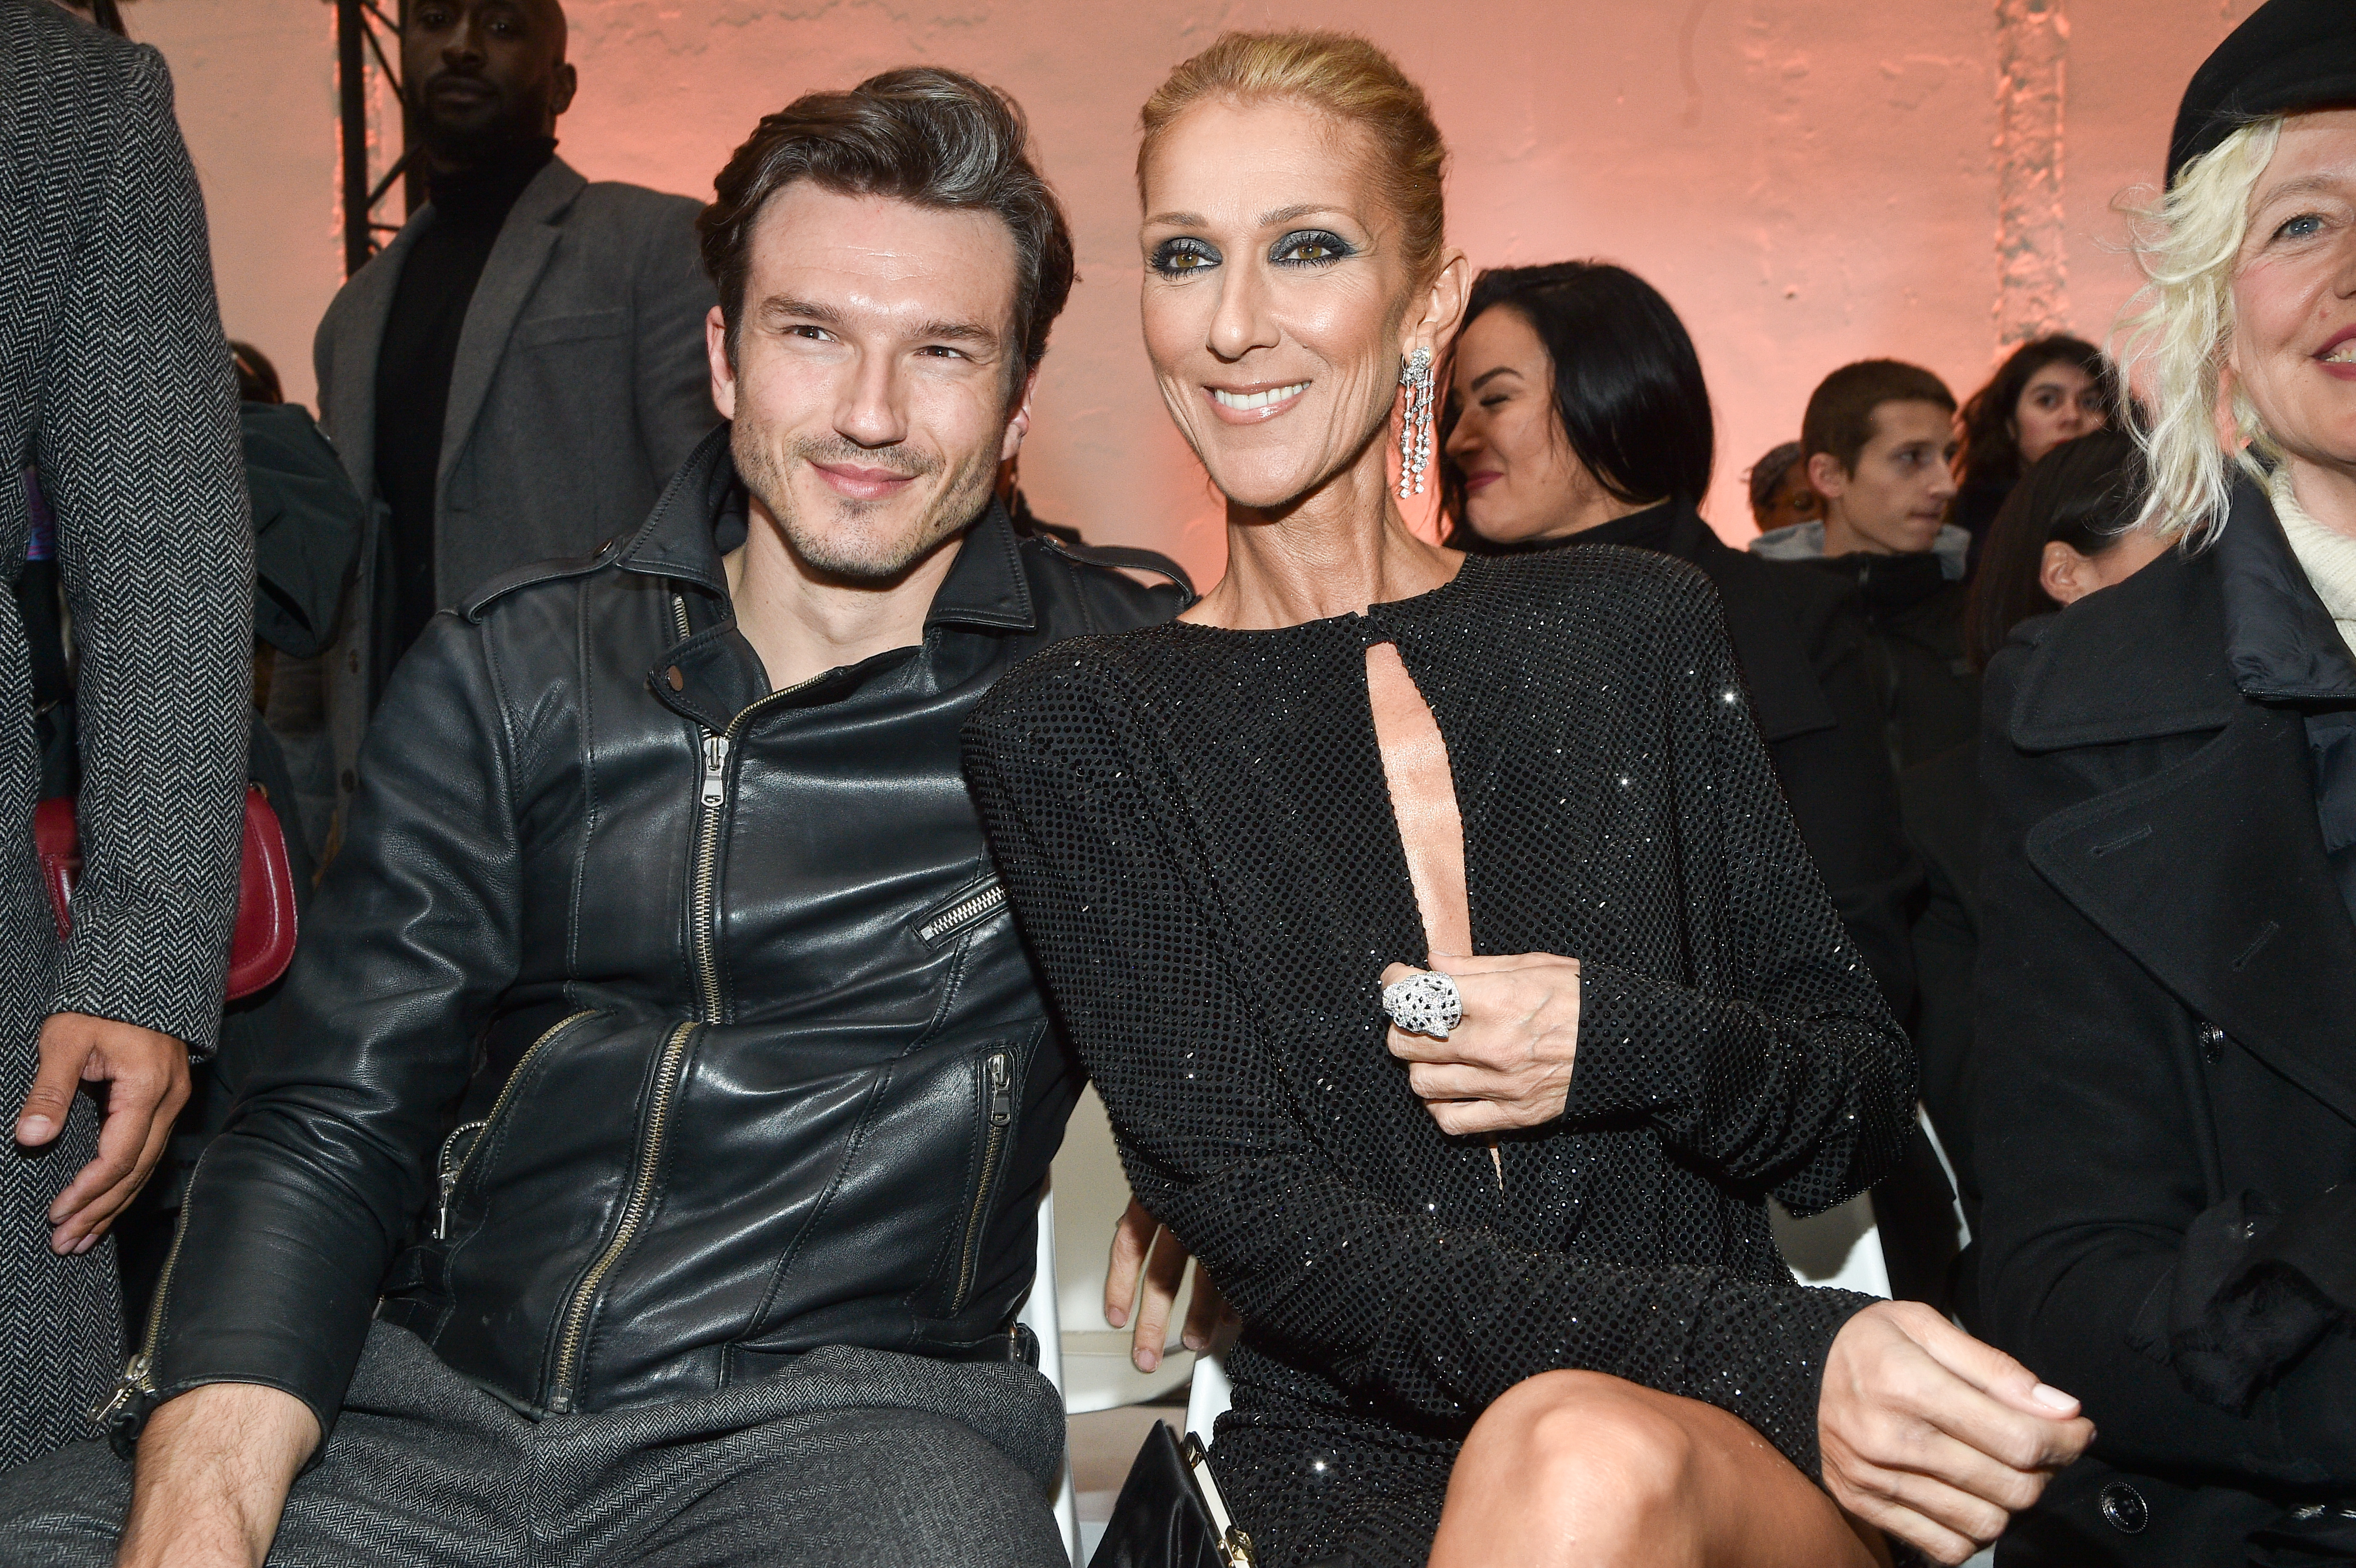 Pepe Munoz and Celine Dion attend the Alexandre Vauthier Haute Couture Spring Summer 2019 show on January 22, 2019 in Paris, France. | Source: Getty Images